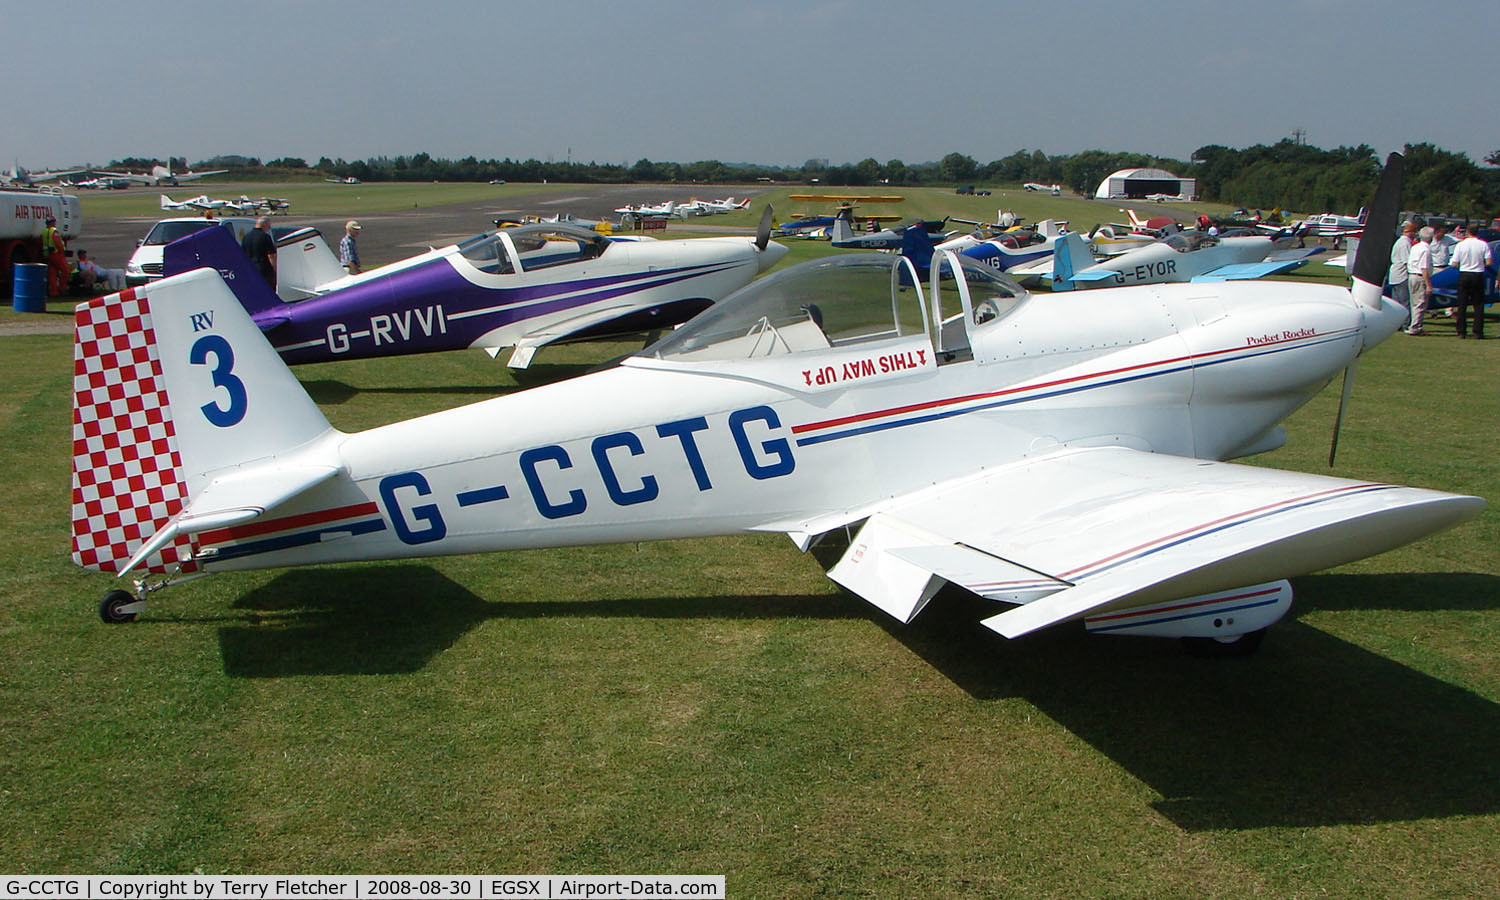 G-CCTG, 2004 Vans RV-3B C/N PFA 099-10518, RV-3B - Participant in the 2008 RV Fly-in at North Weald Uk